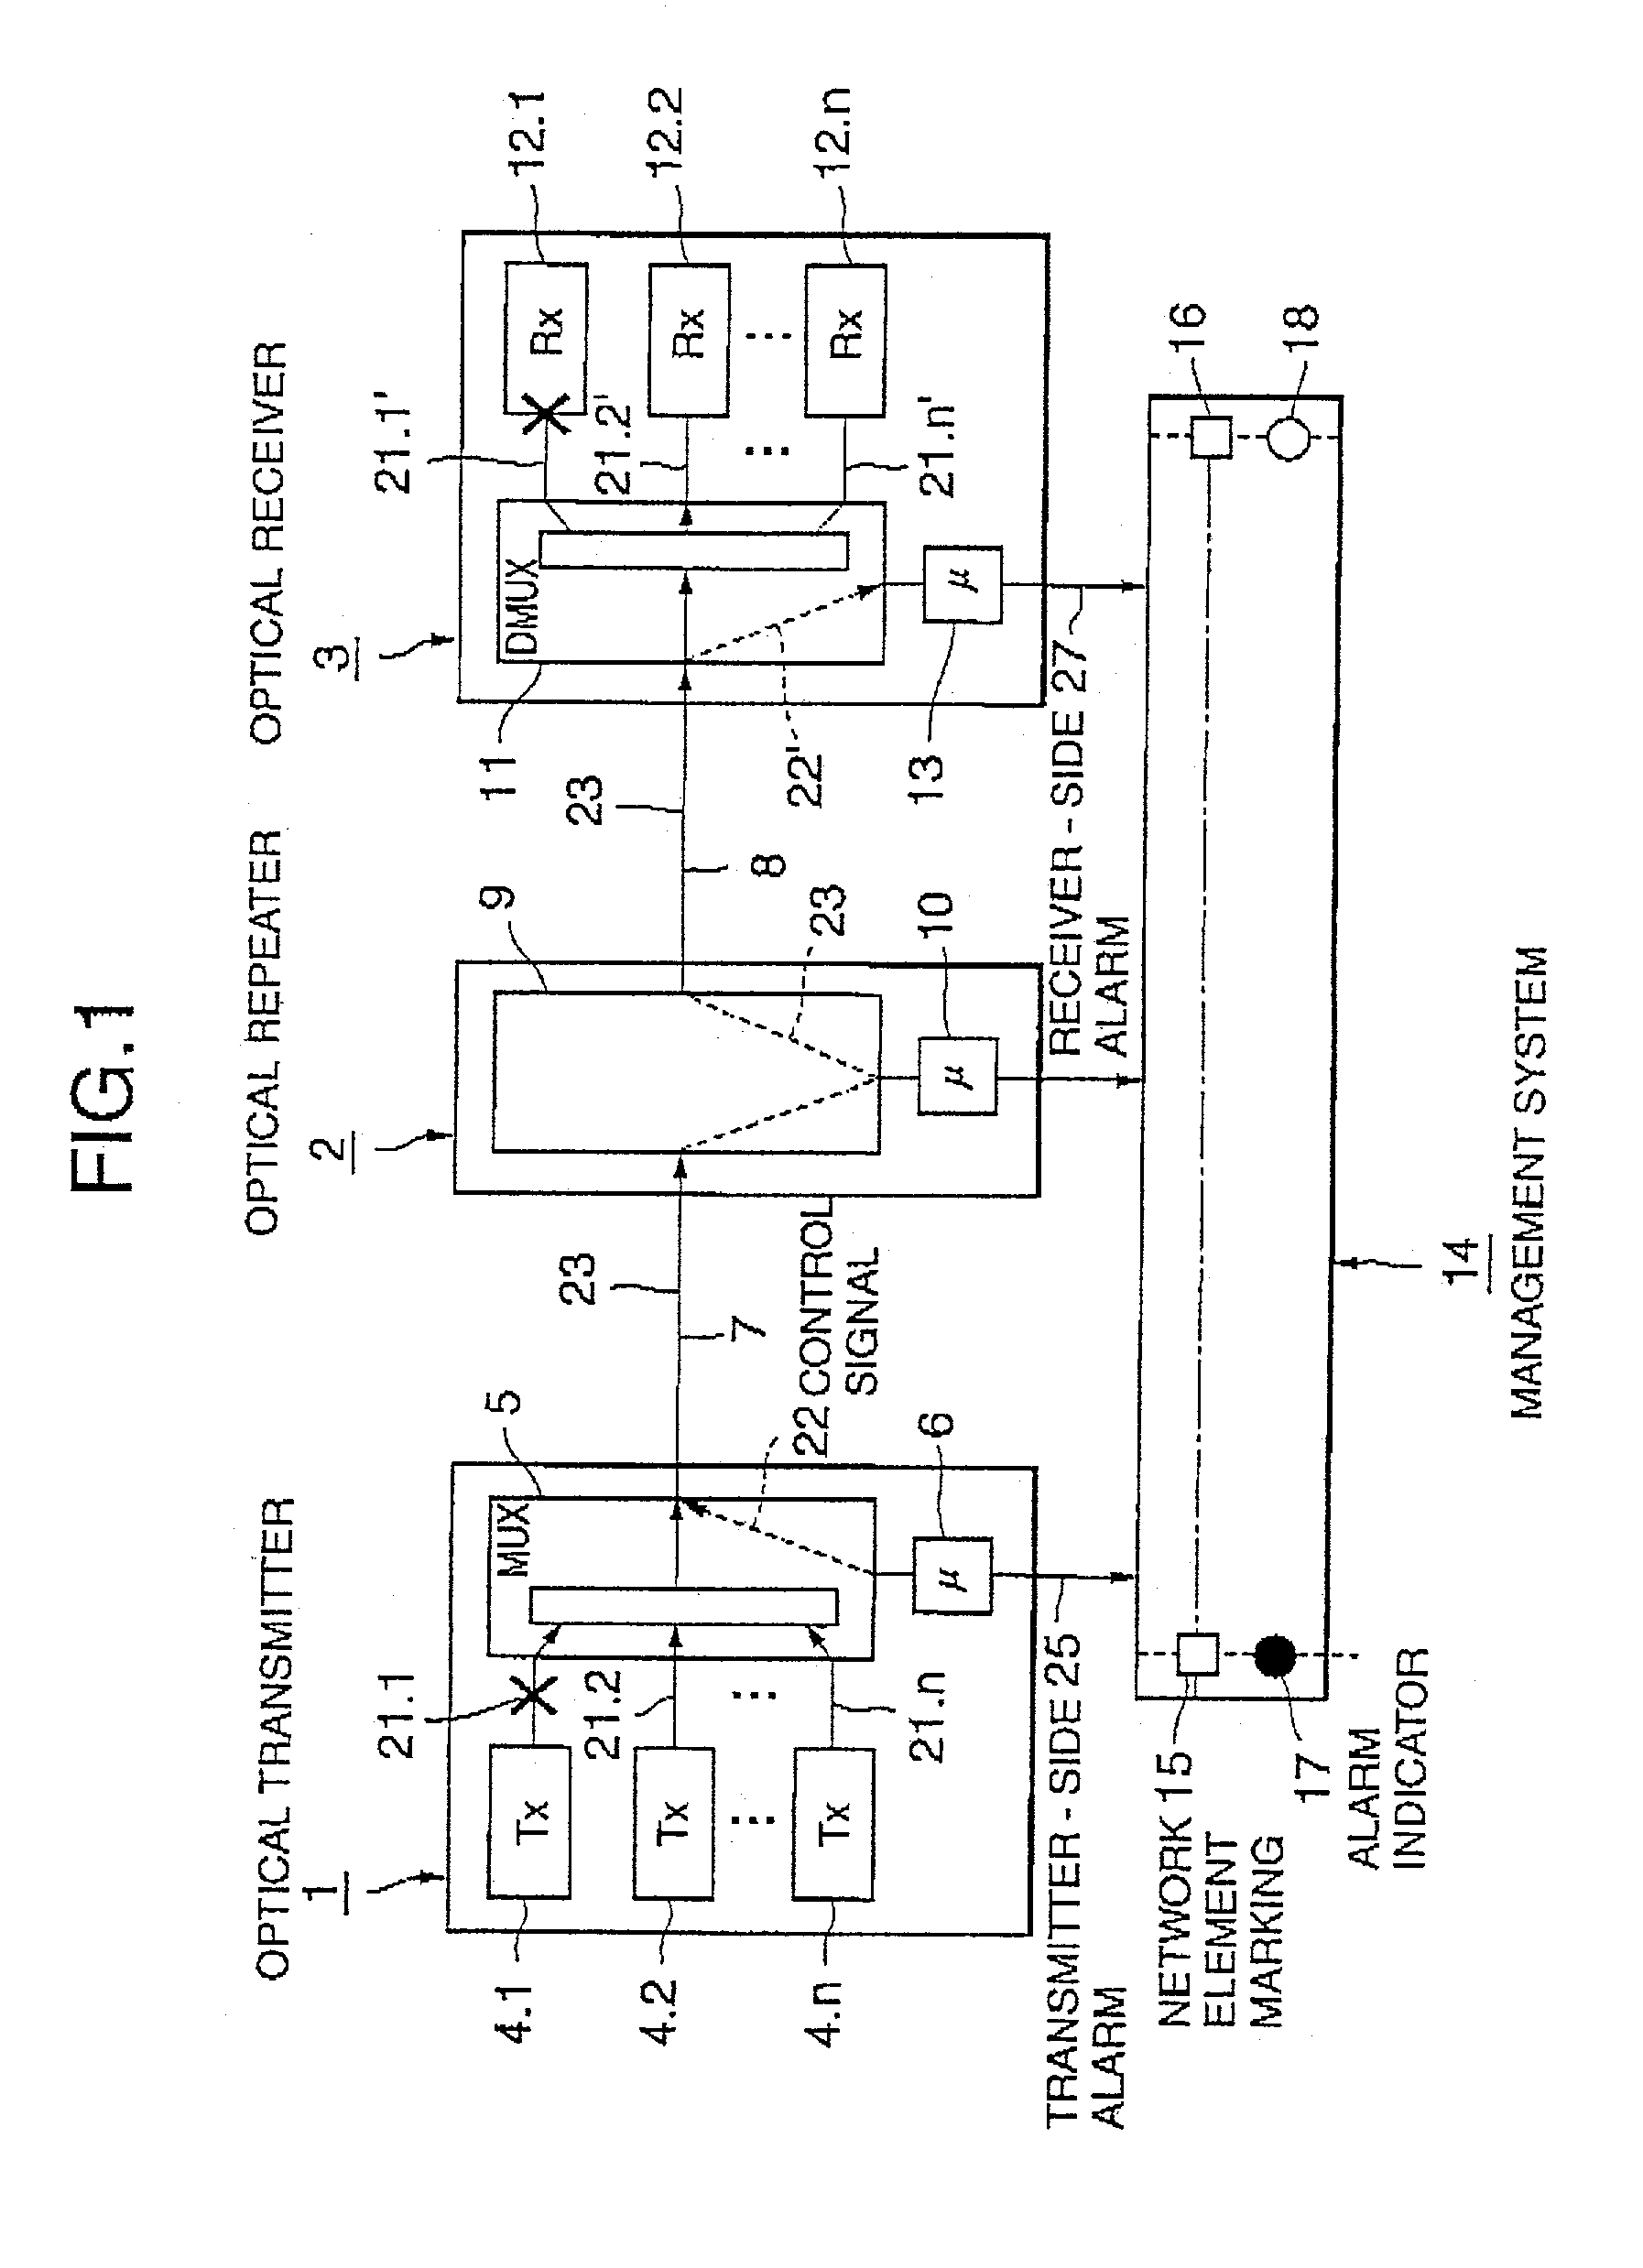 Alarm control system and method